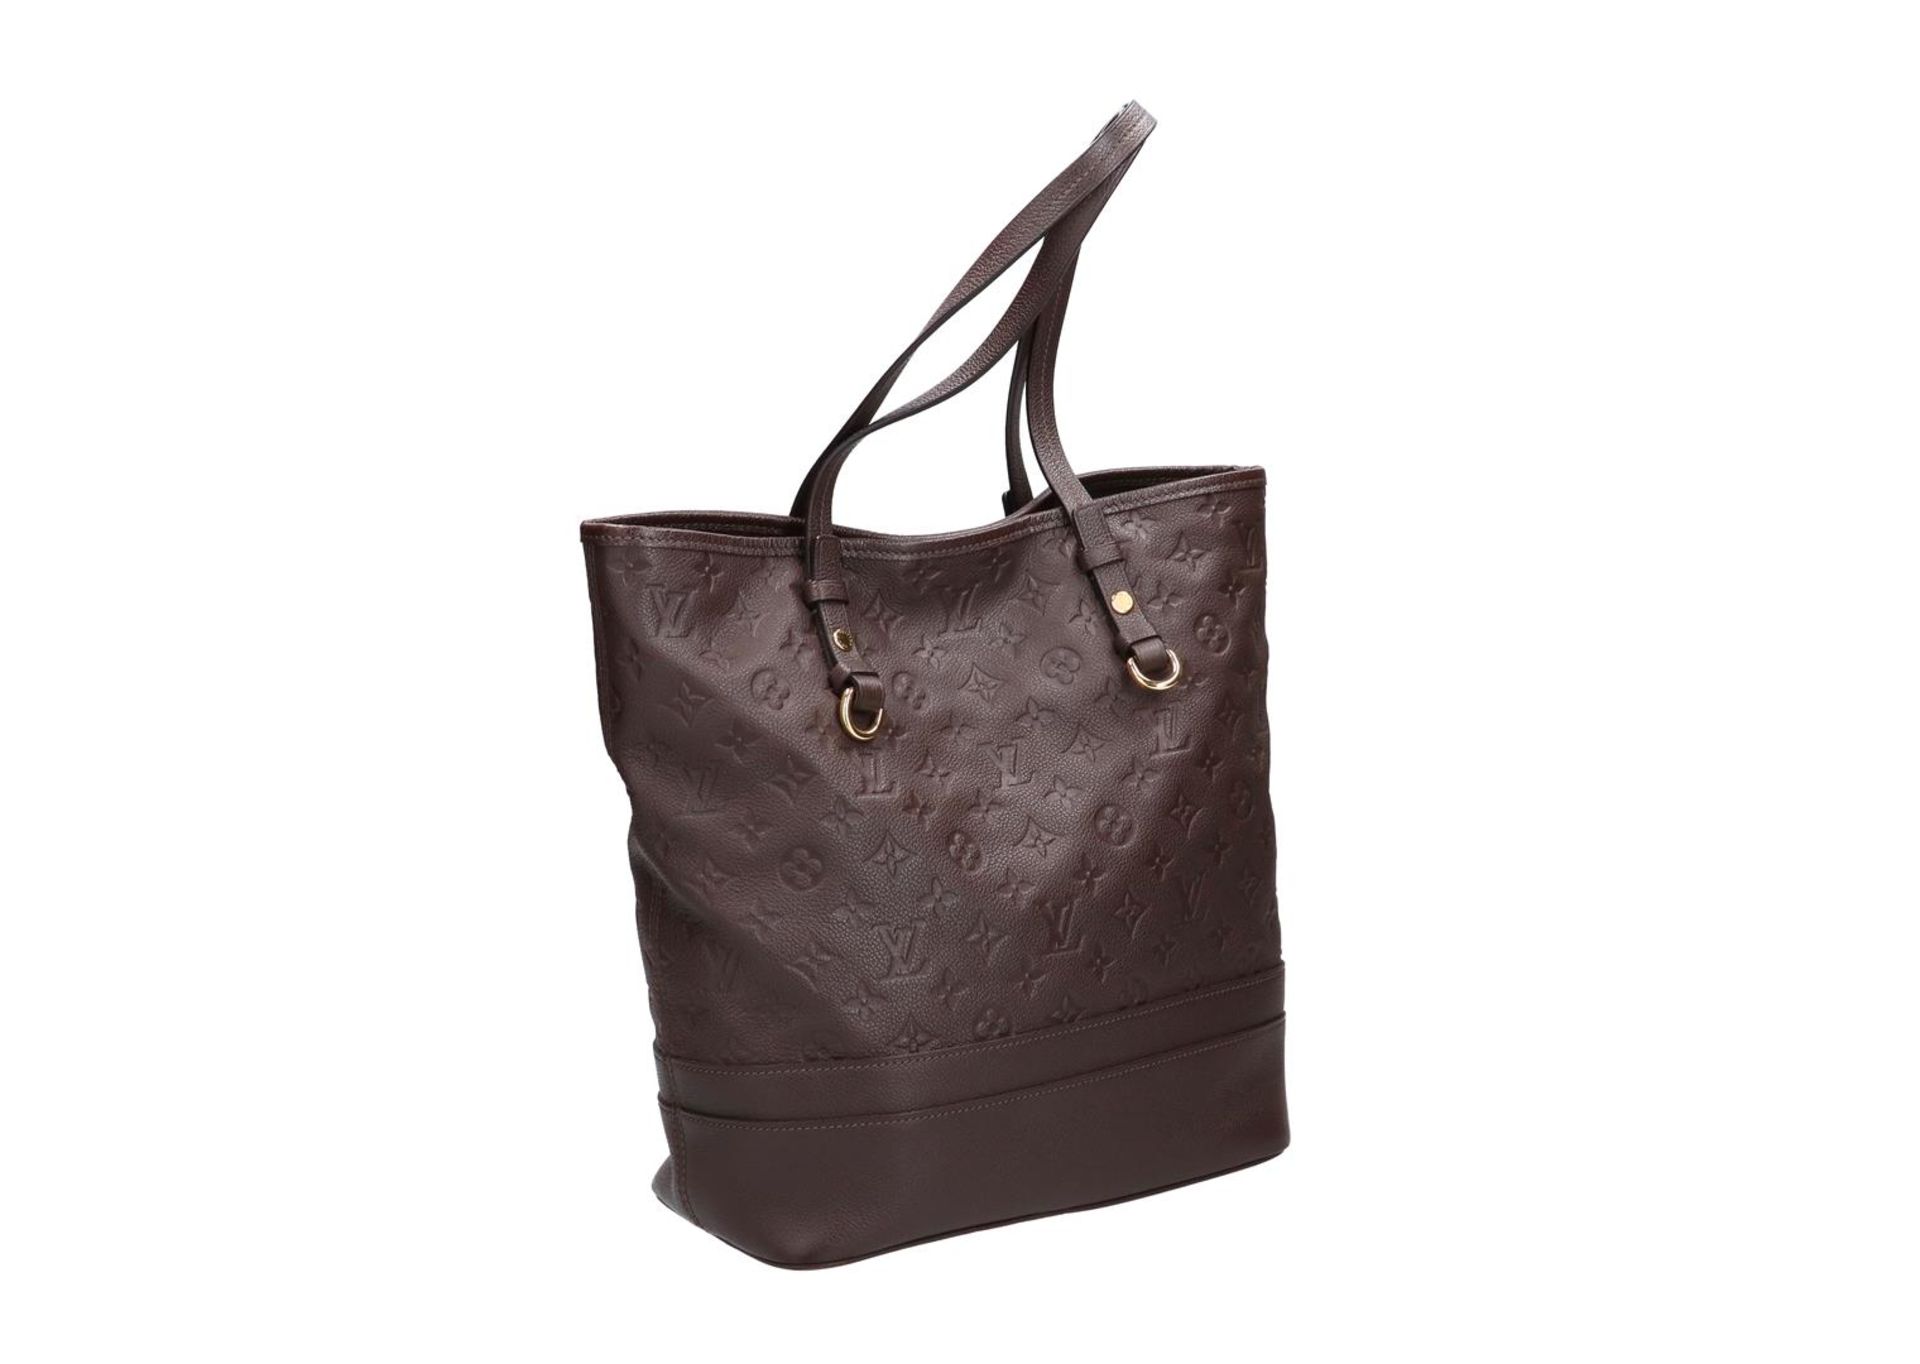 Louis Vuitton, brown leather embossed monogram tote bag, 'Citadines', no. AH2102. H x W x D: 31 x 31 - Image 2 of 4